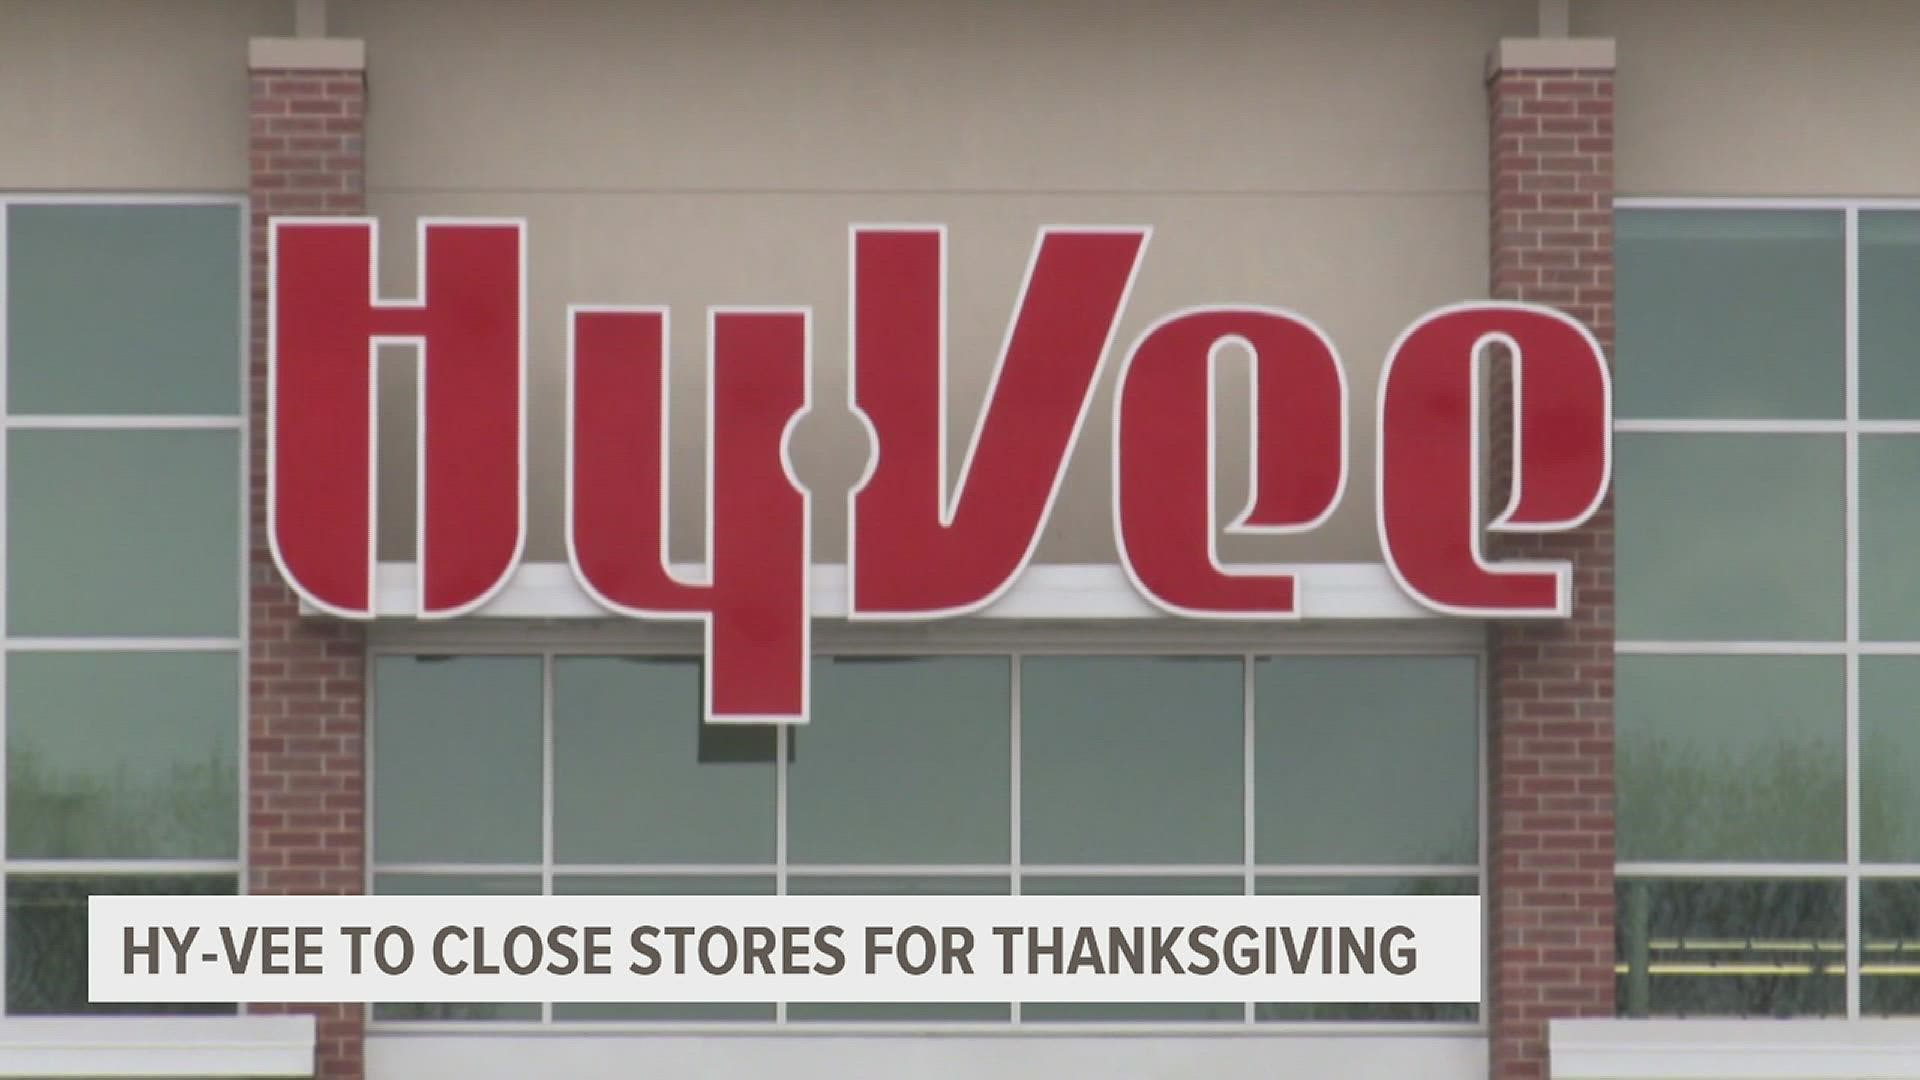 This is the first time in the store's 92-year history that more than 285 retail locations will be closed on the holiday.